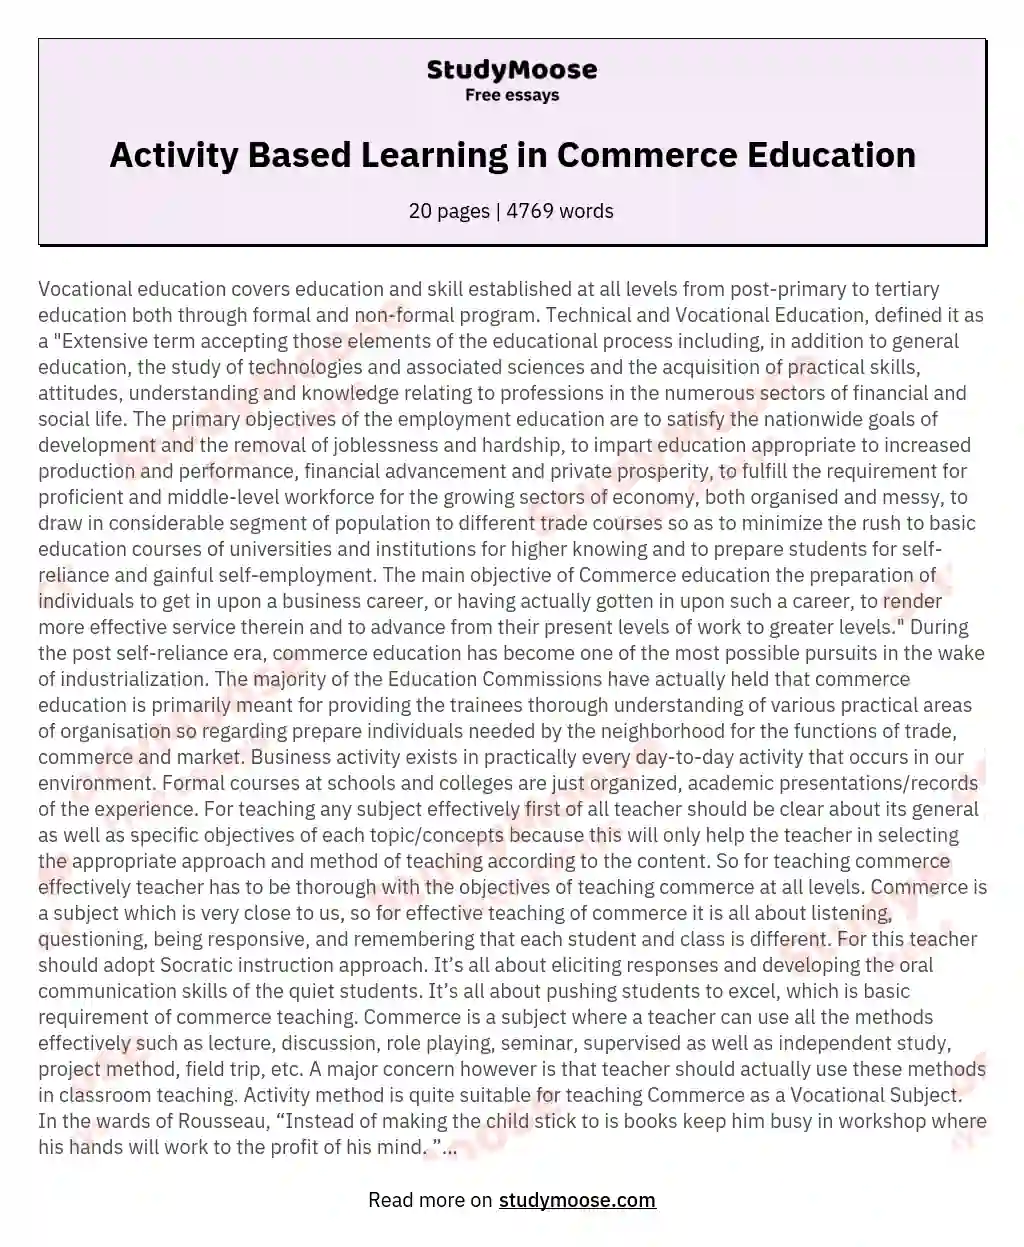 Activity Based Learning in Commerce Education